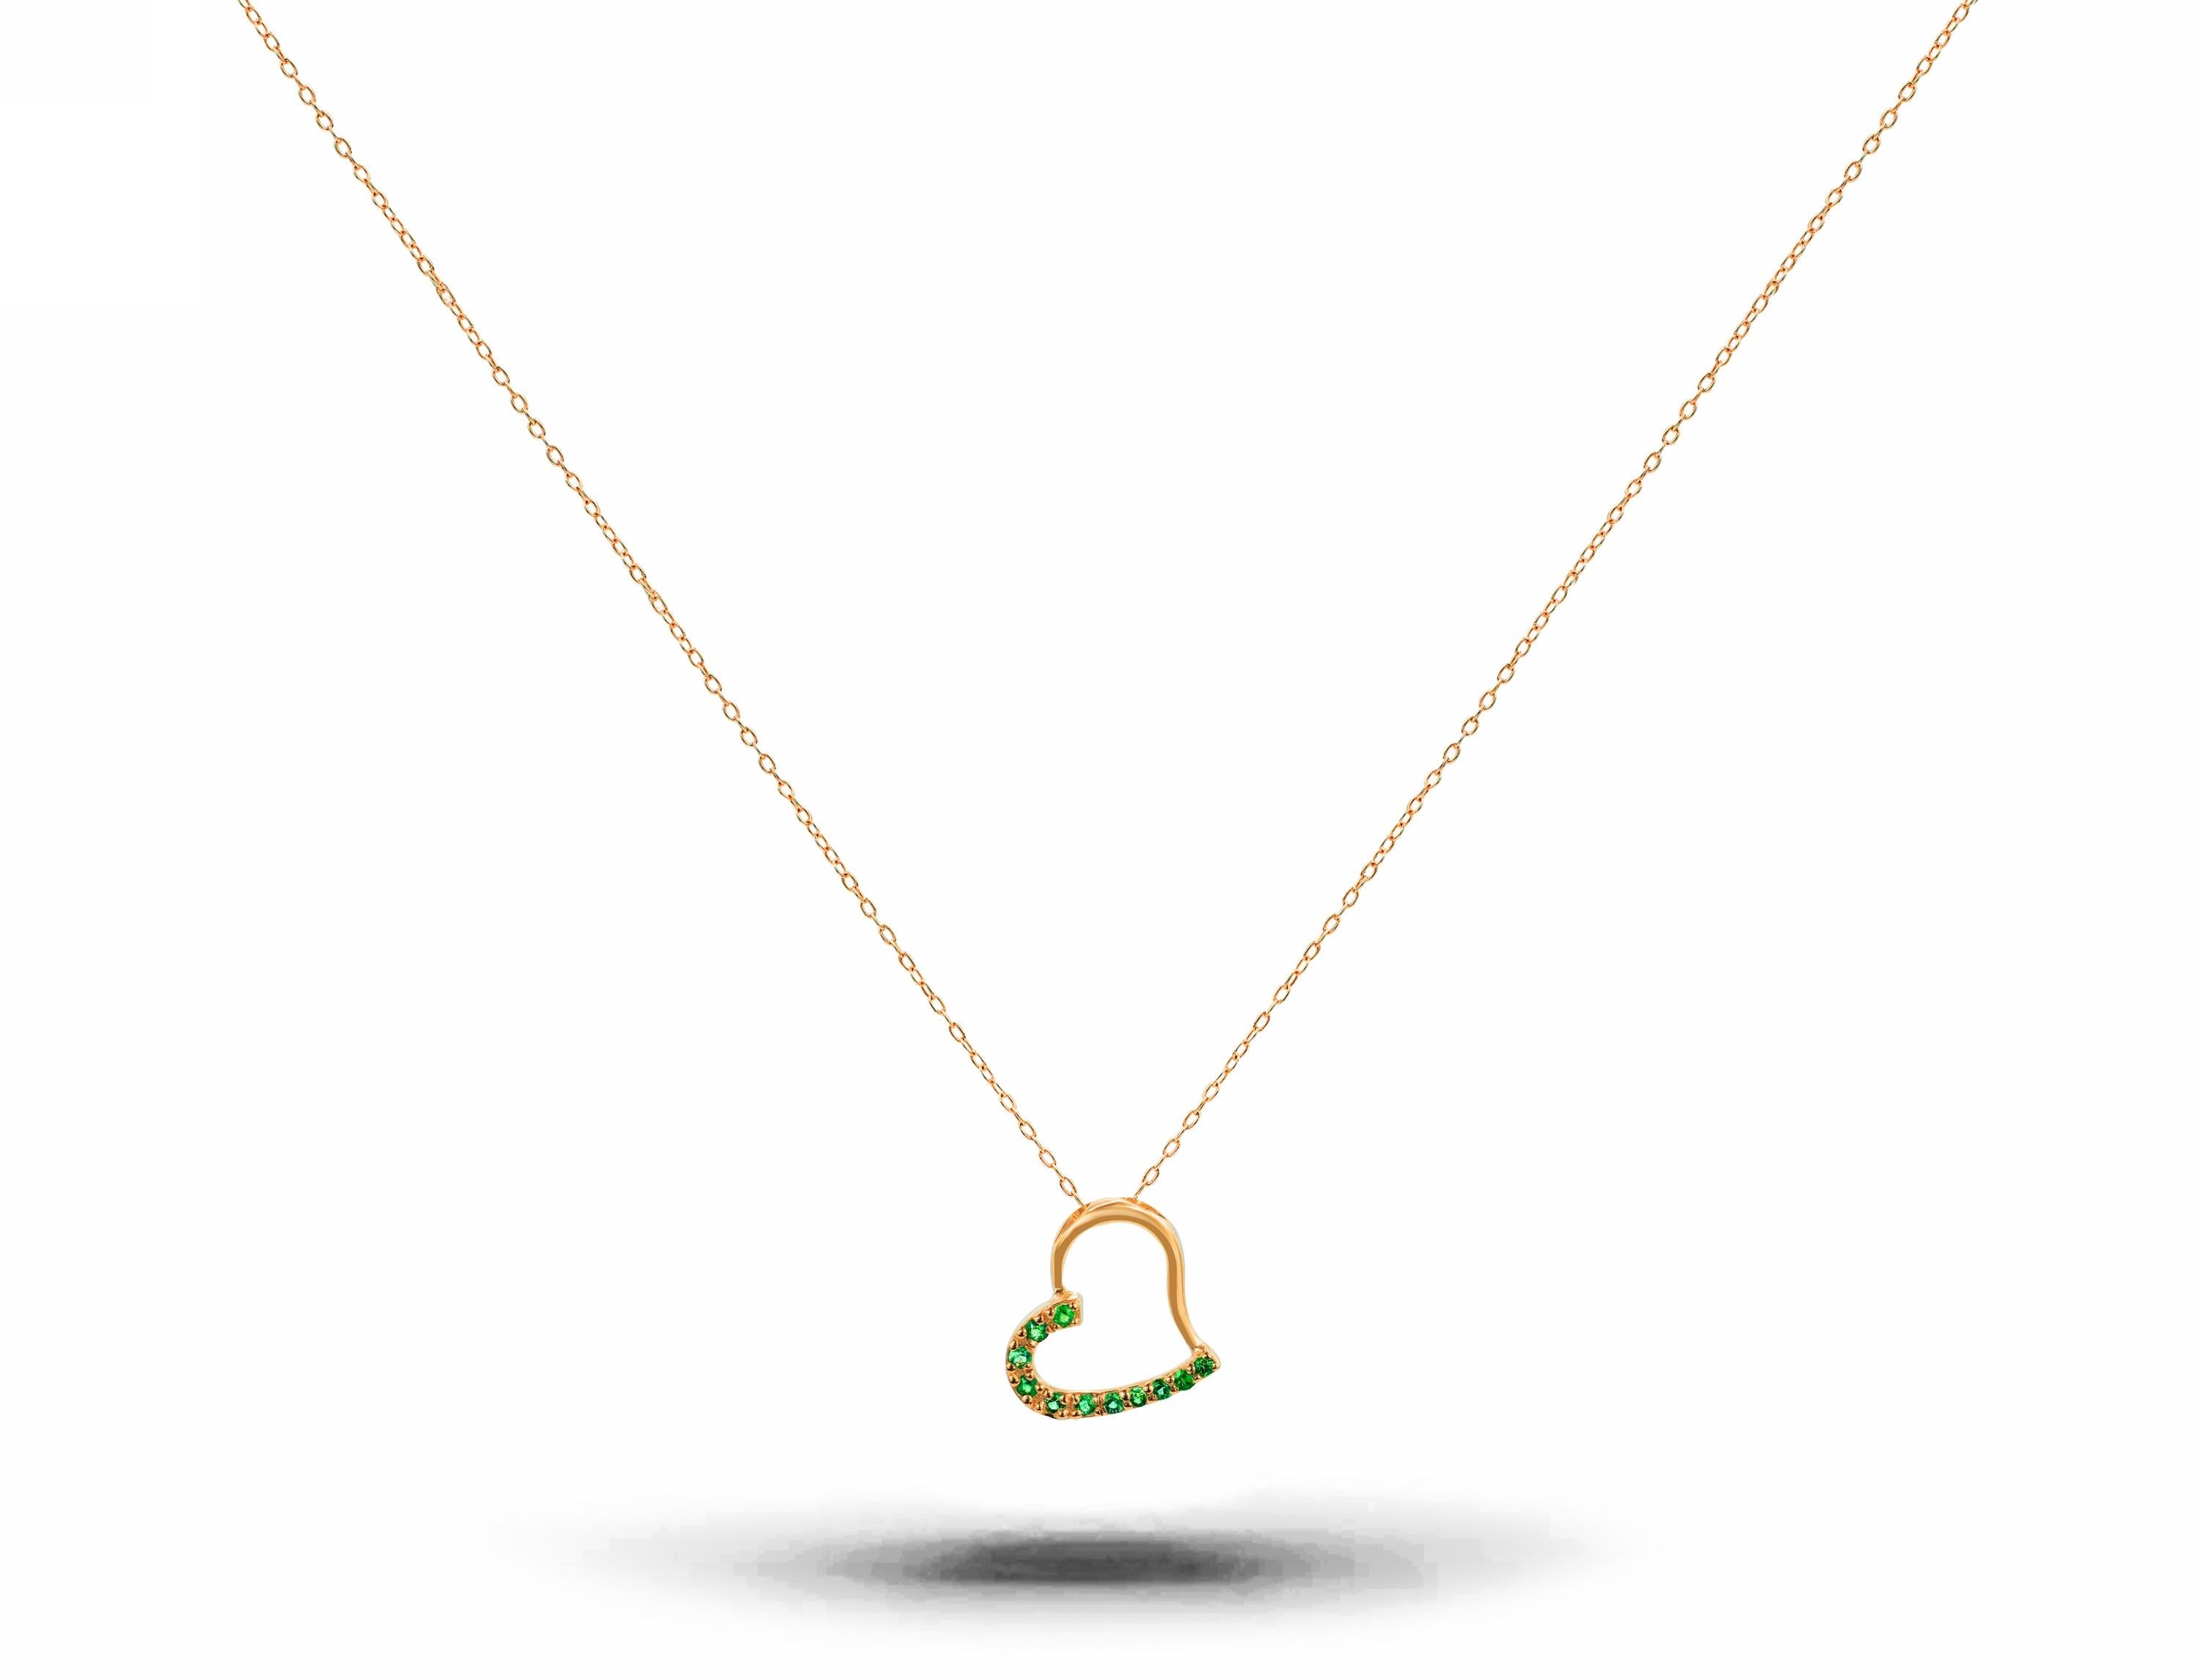 Beautiful little minimalist necklace is made of 18k solid gold adorned with natural AAA quality Emerald.
Available in three colors of gold: White Gold / Rose Gold / Yellow Gold.

Perfect for wearing by itself for a minimal everyday style or layered